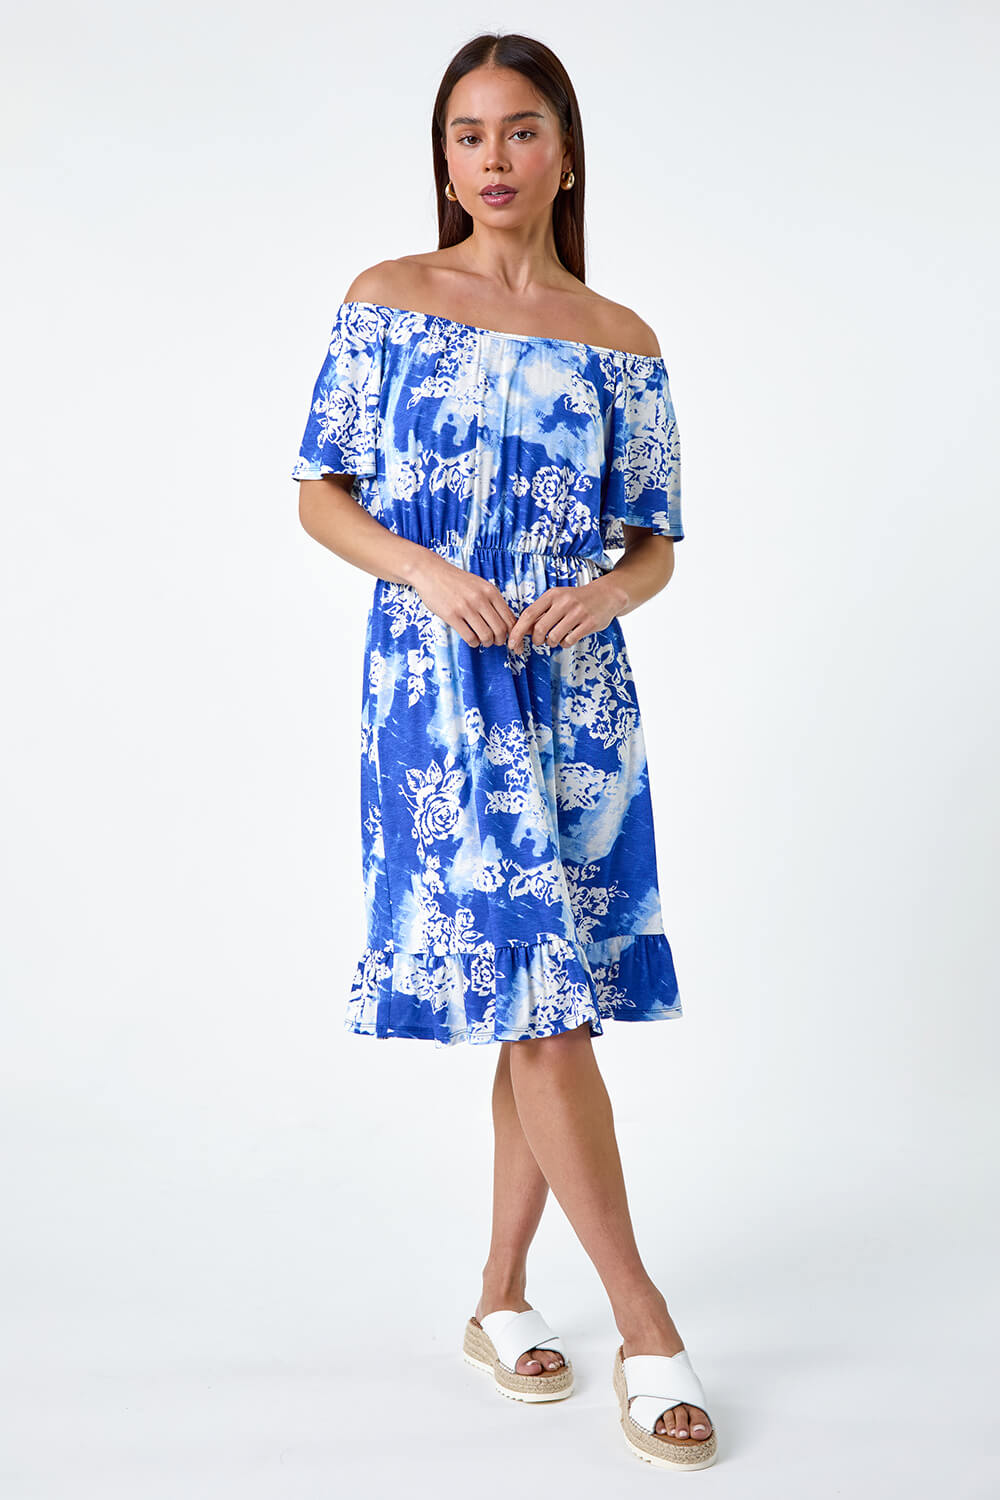 Blue Petite Abstract Floral Stretch Frill Dress, Image 2 of 5